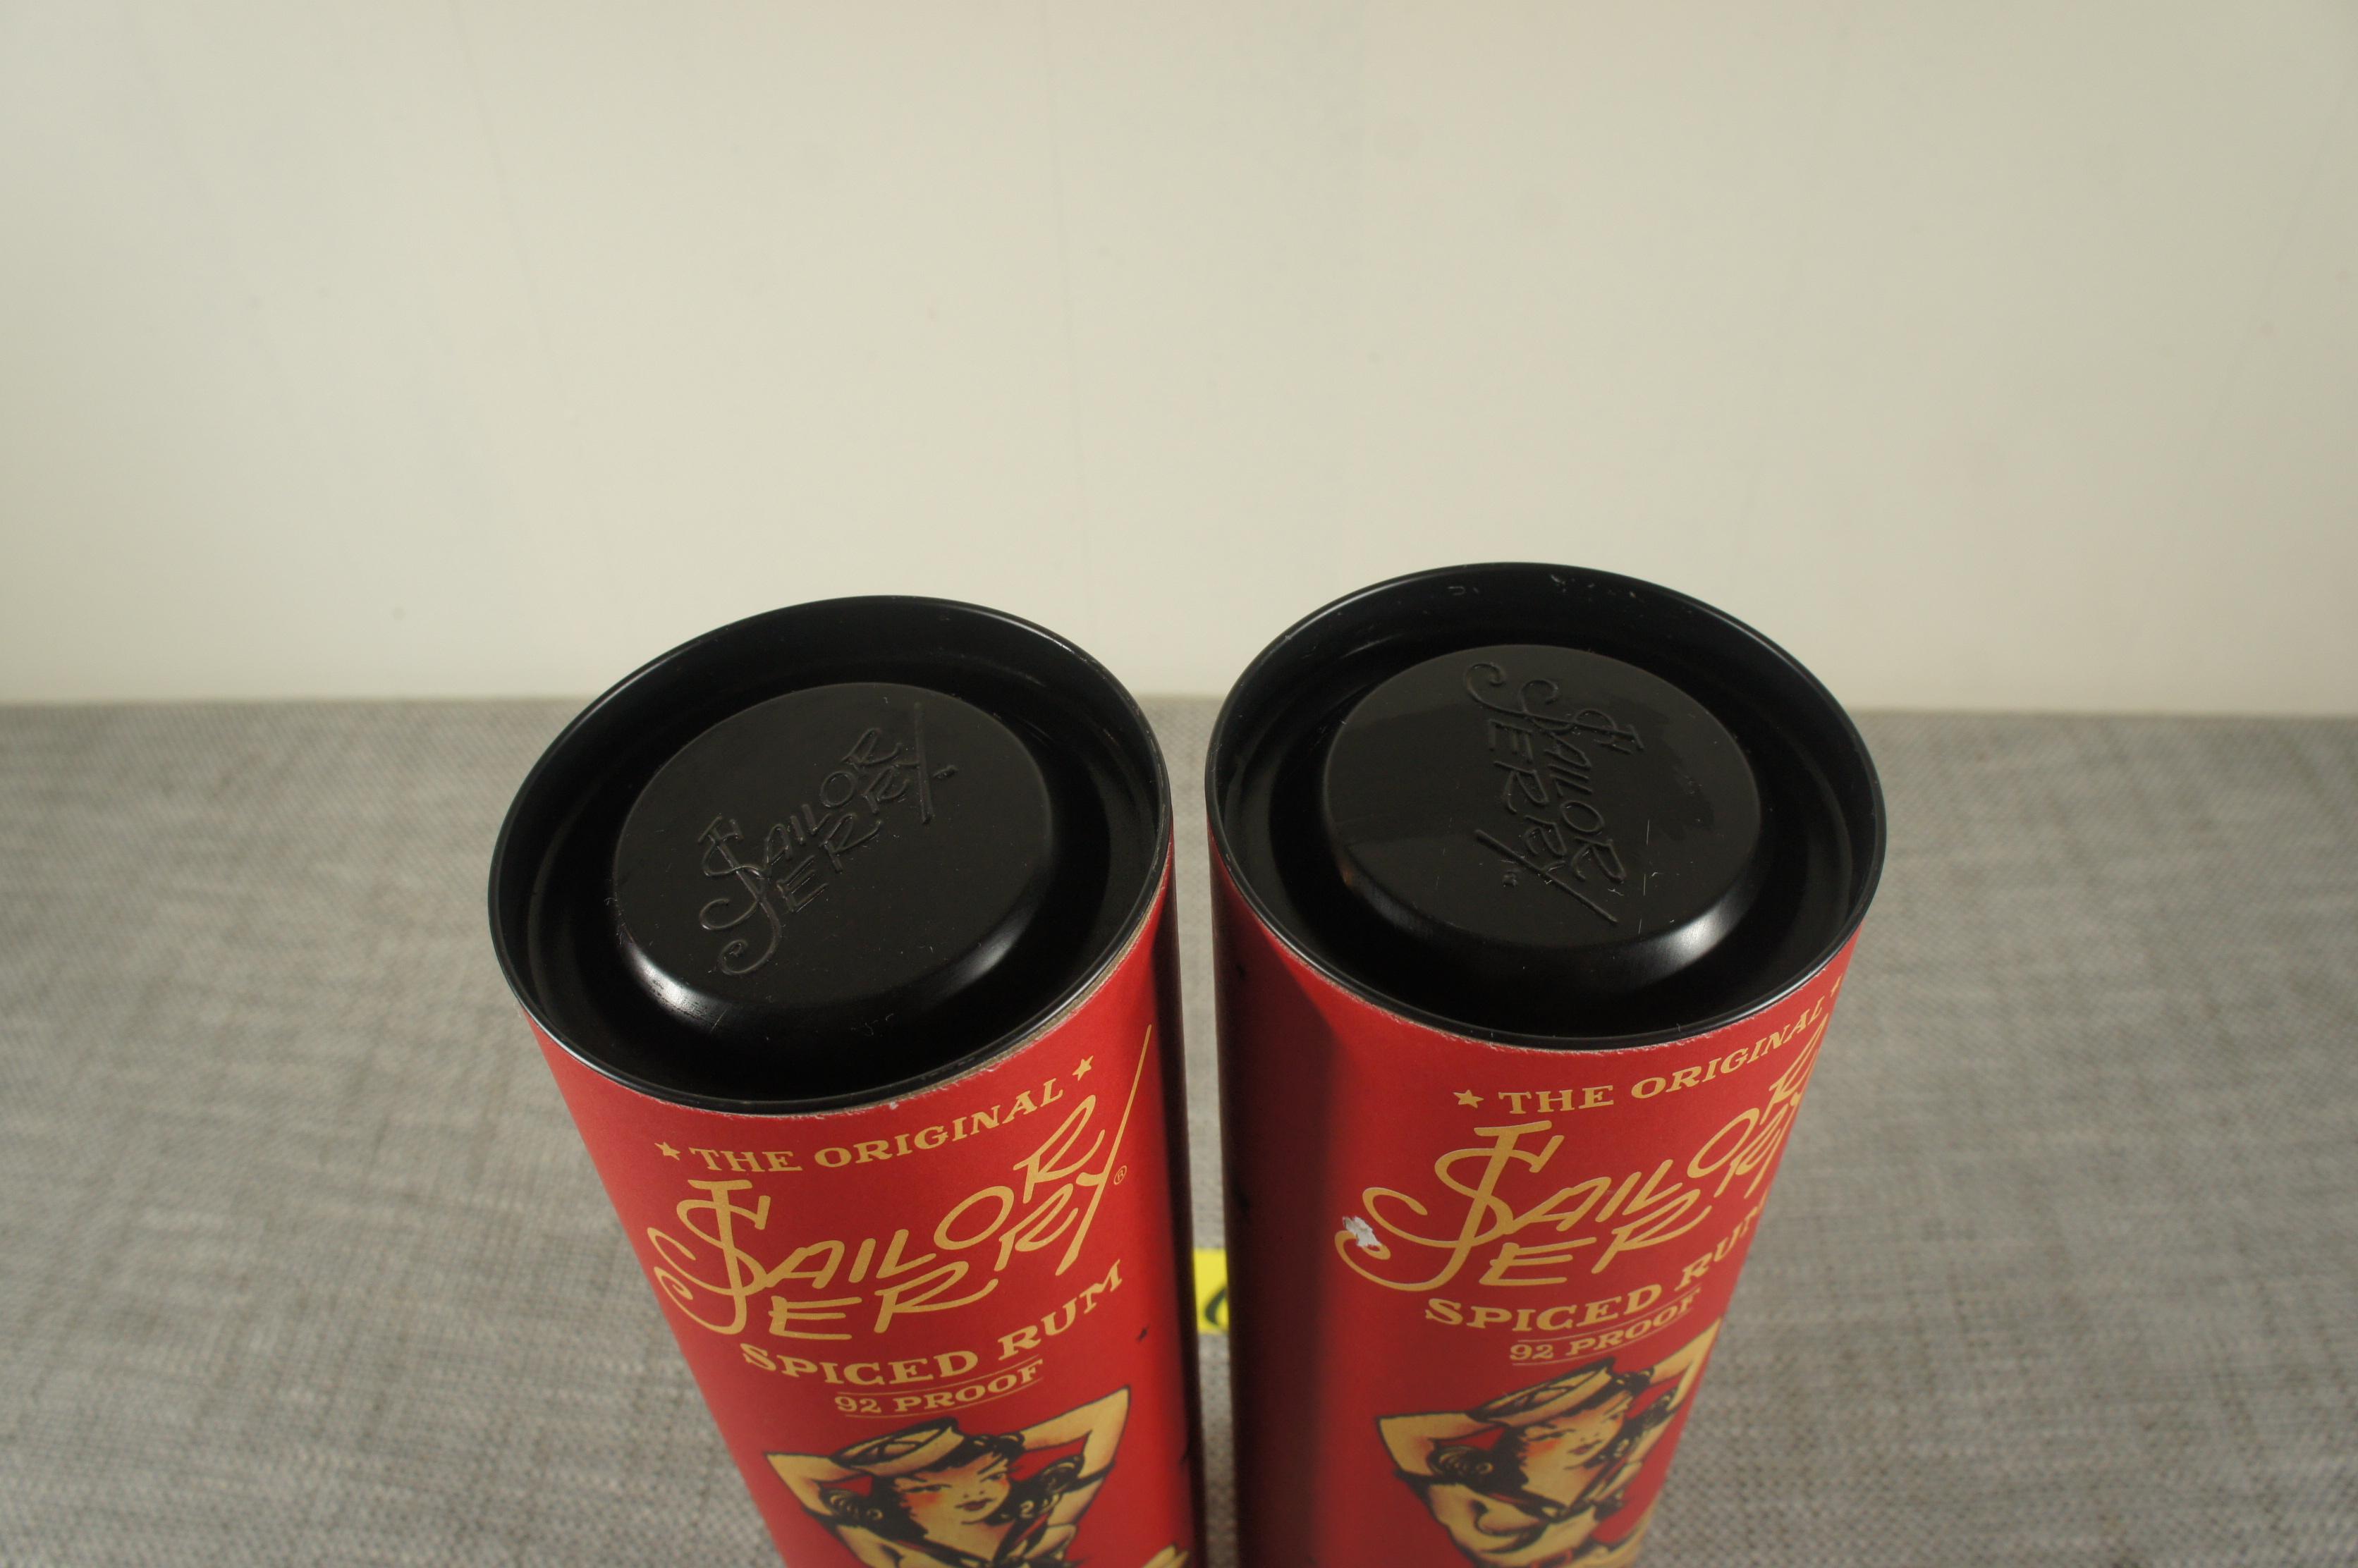 Sailor Jerry Collector's Bottle sets with Art Work -CO